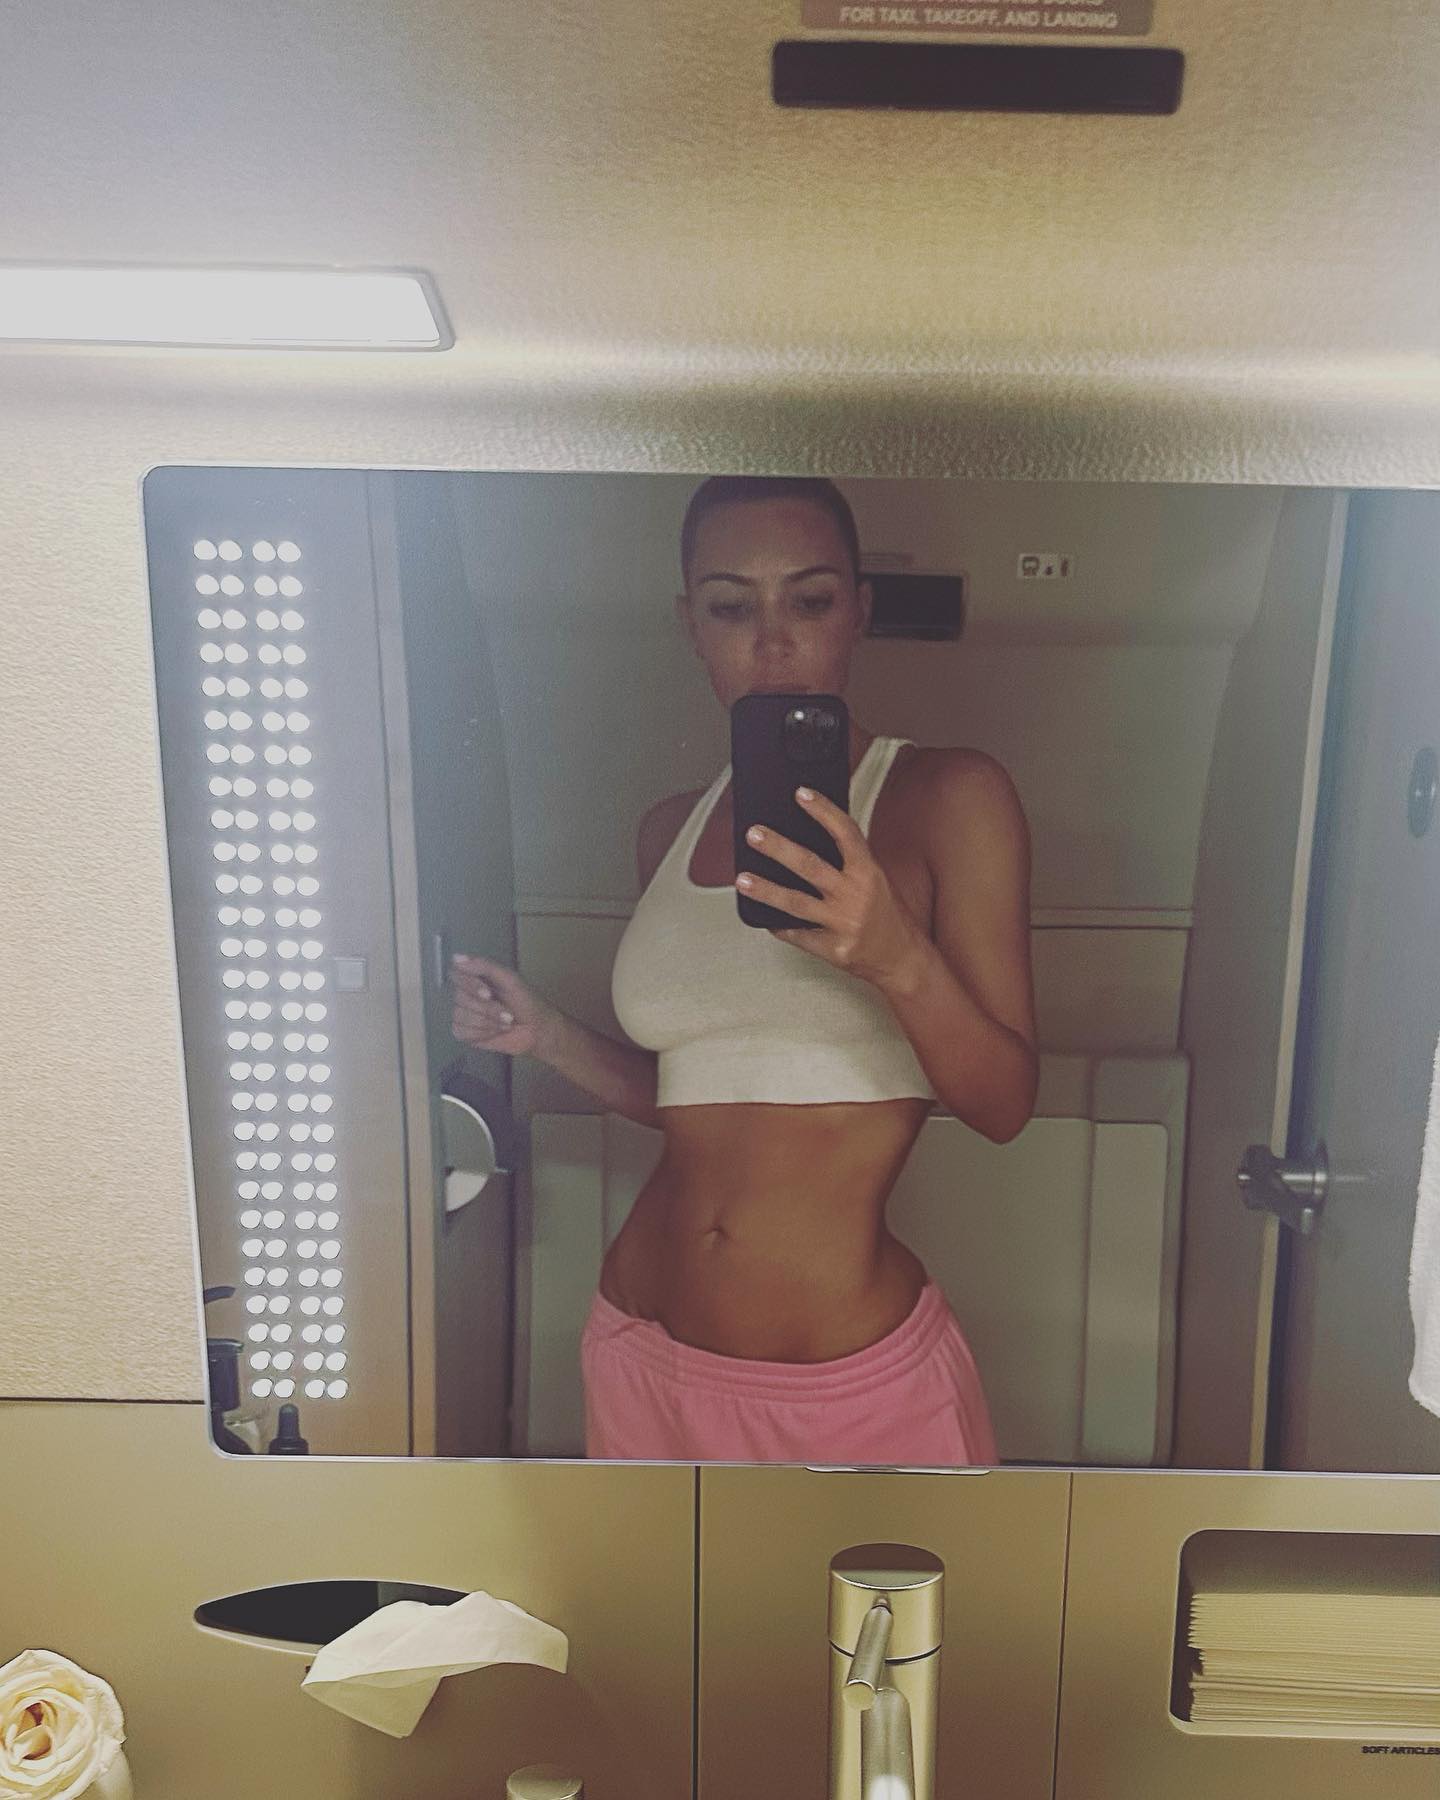 Fans accused Kim of Photoshopping her waist in a new mirror selfie